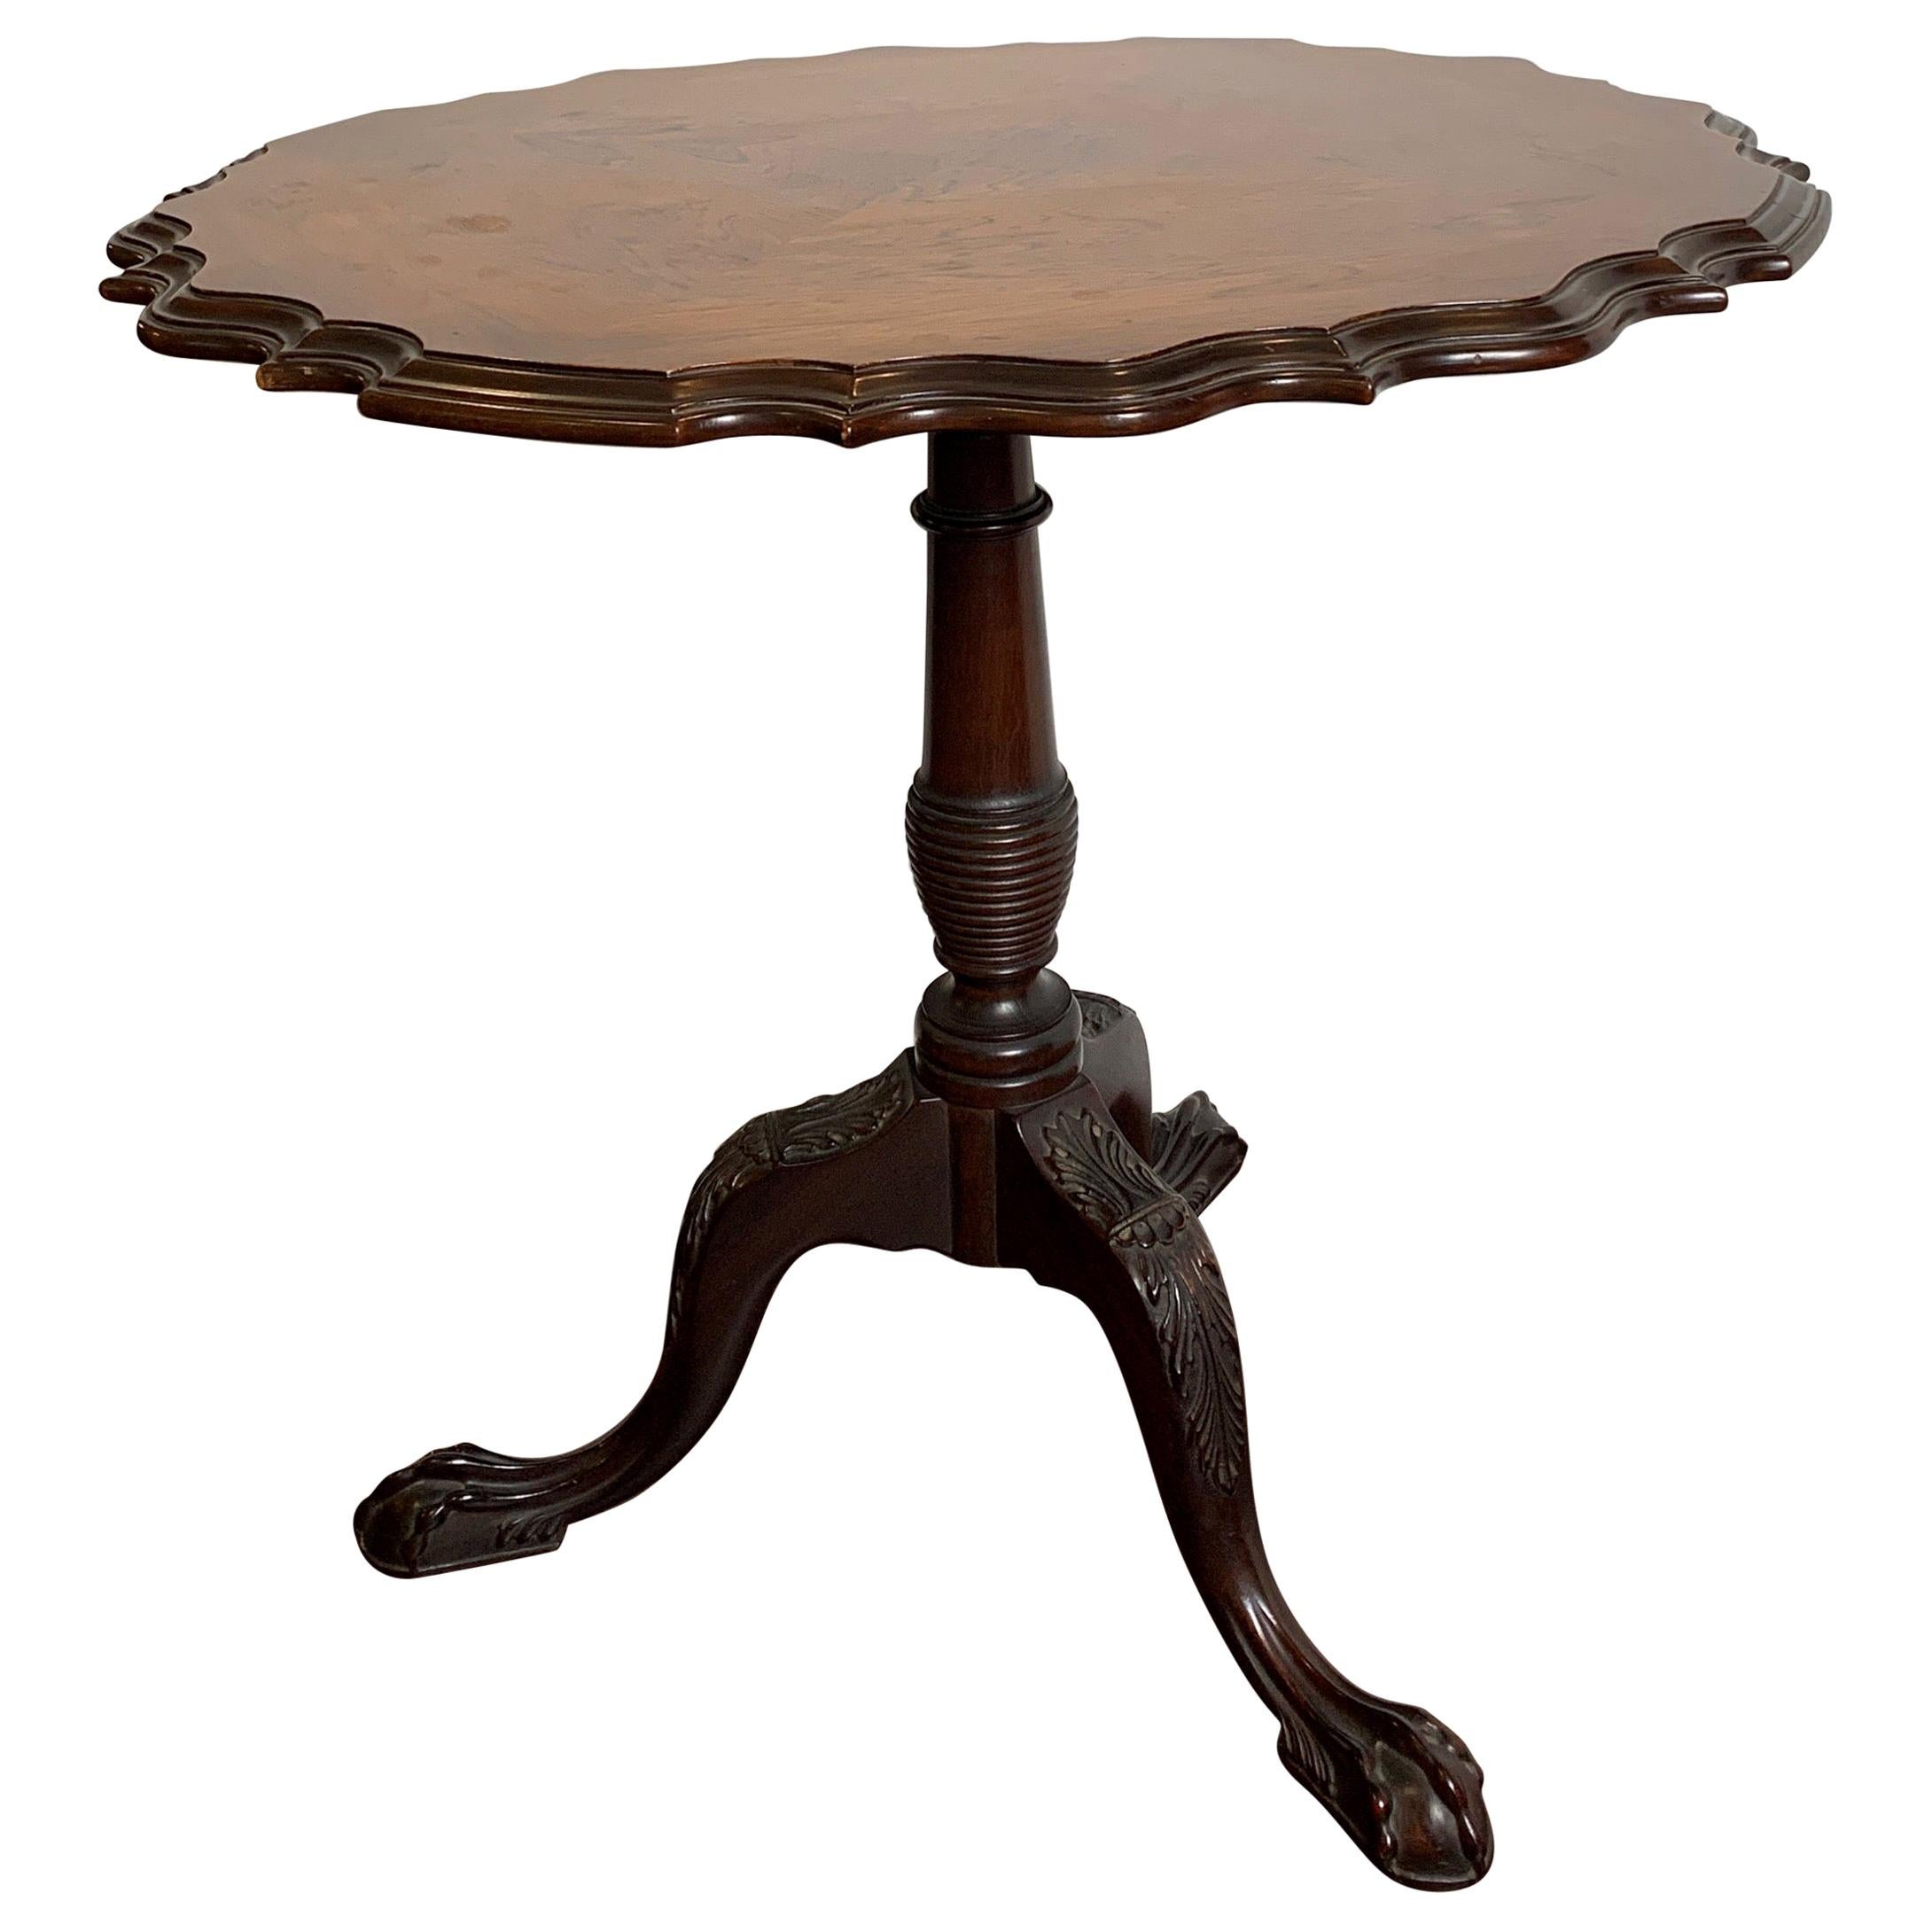 Nicely Carved Wood Tilt-Top Table, Mahogany with a Rosewood Top